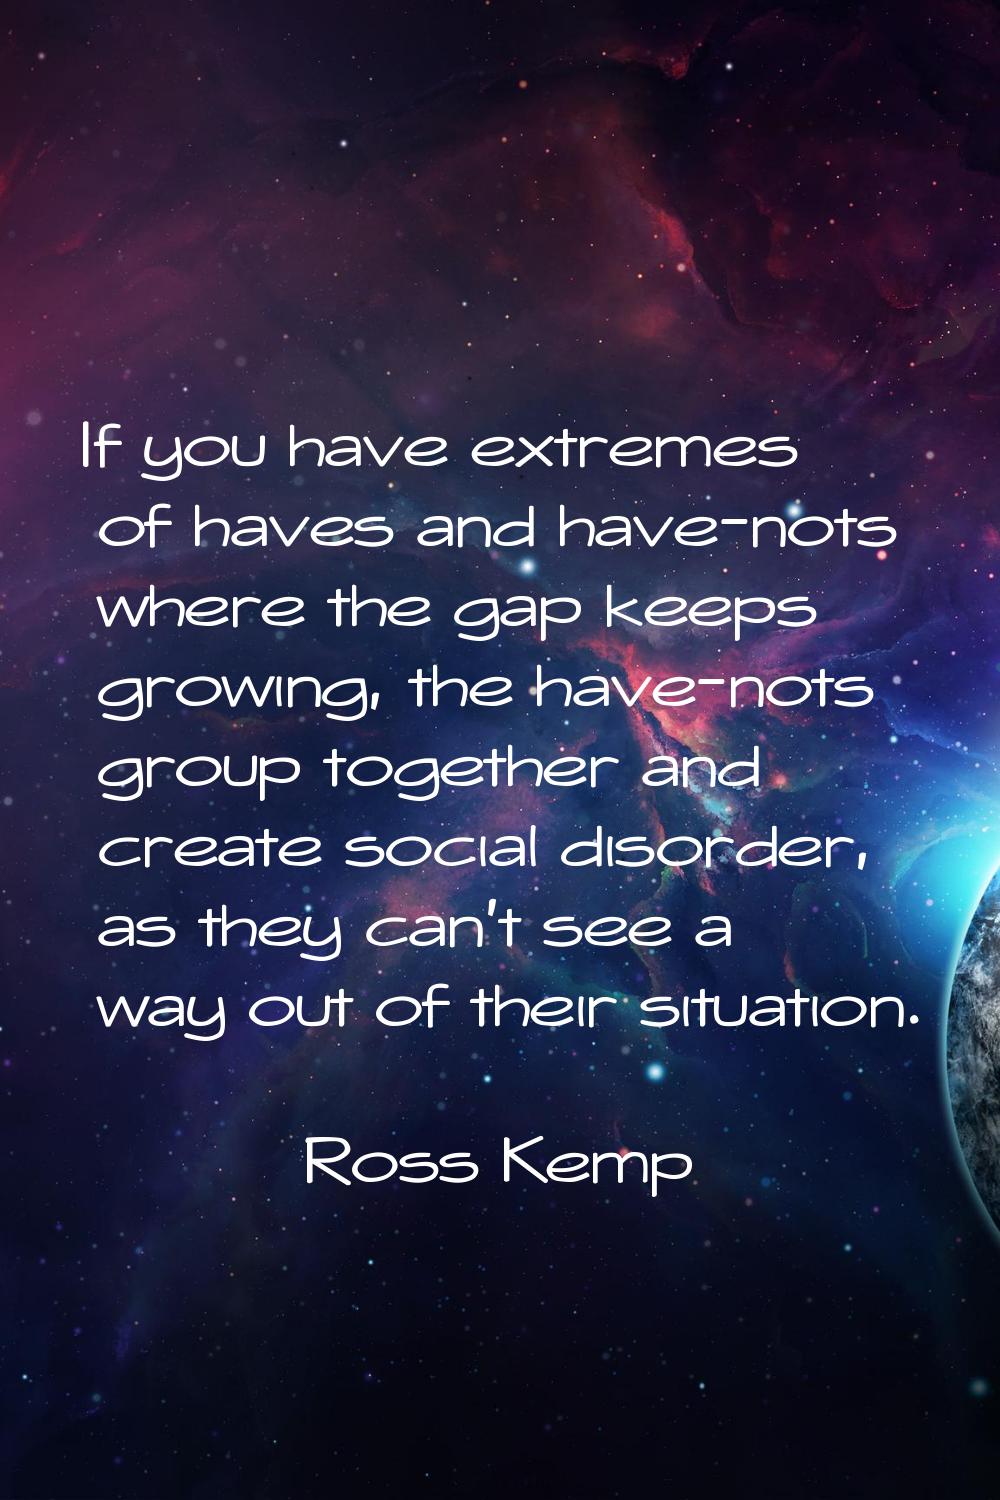 If you have extremes of haves and have-nots where the gap keeps growing, the have-nots group togeth